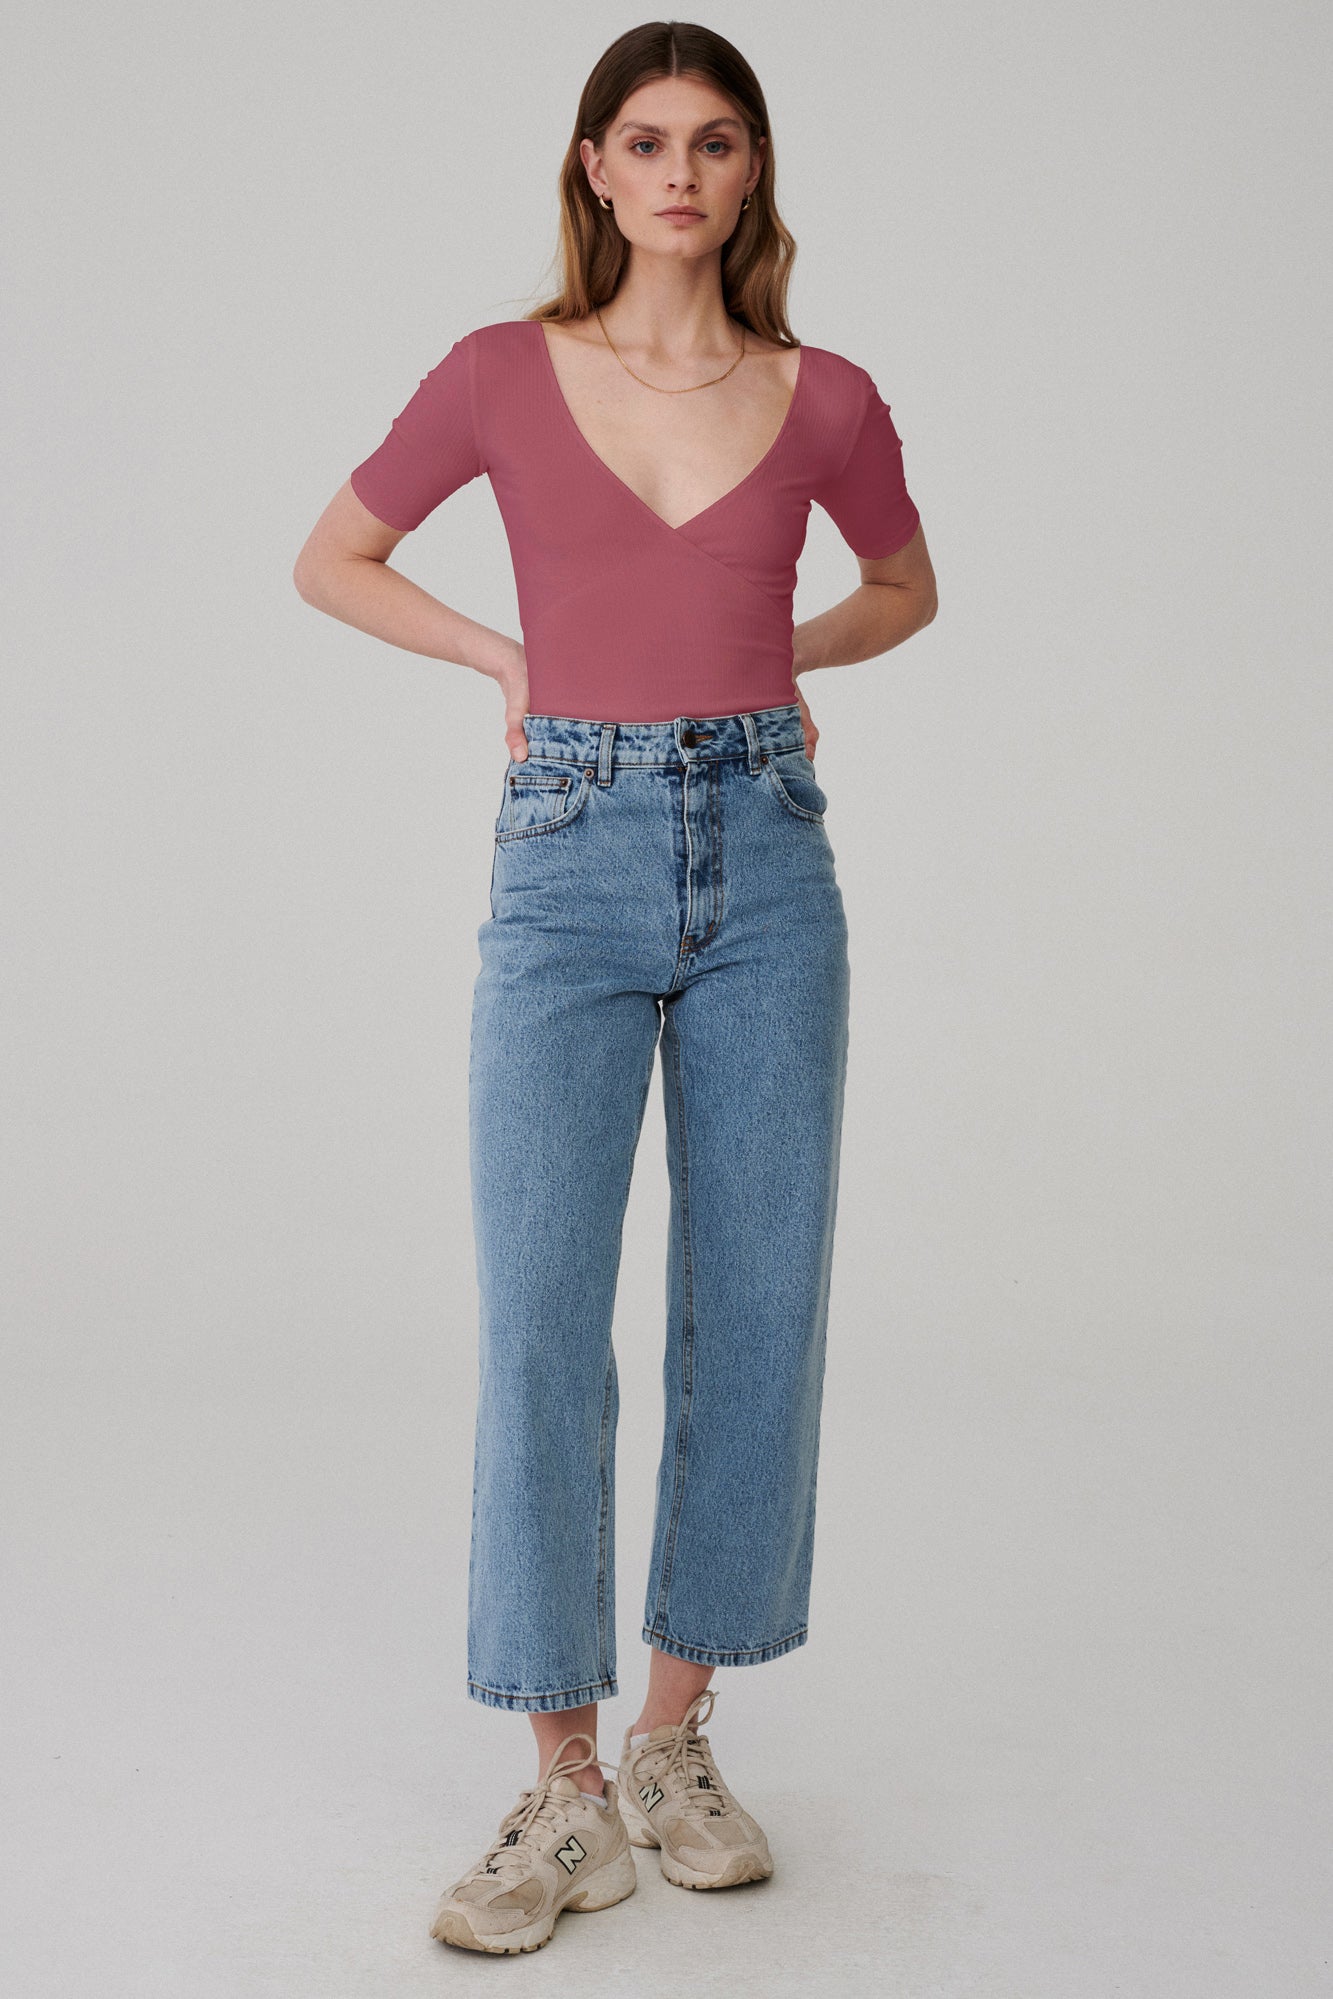 Bodysuit in organic cotton / 01 / 04 / raspberry pink *cropped-jeans-from-recycled-cotton-05-12-light-indigo* ?The model is 177 cm high and wears size S?